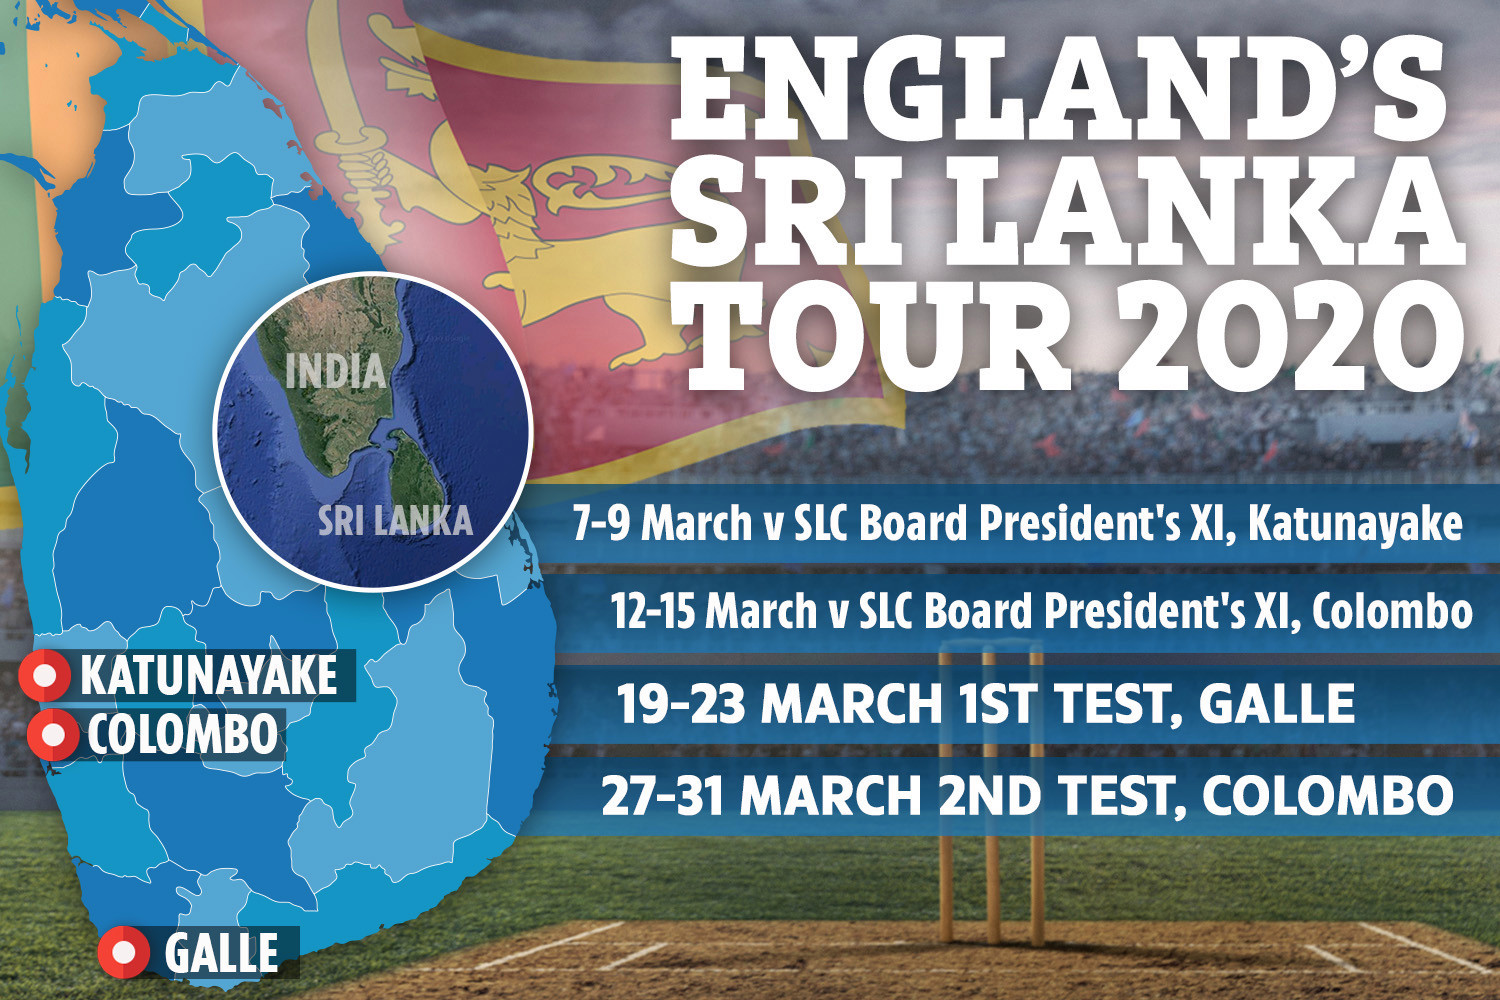 , England stars warned to reject fan requests for autographs during Sri Lanka tour over coronavirus fears